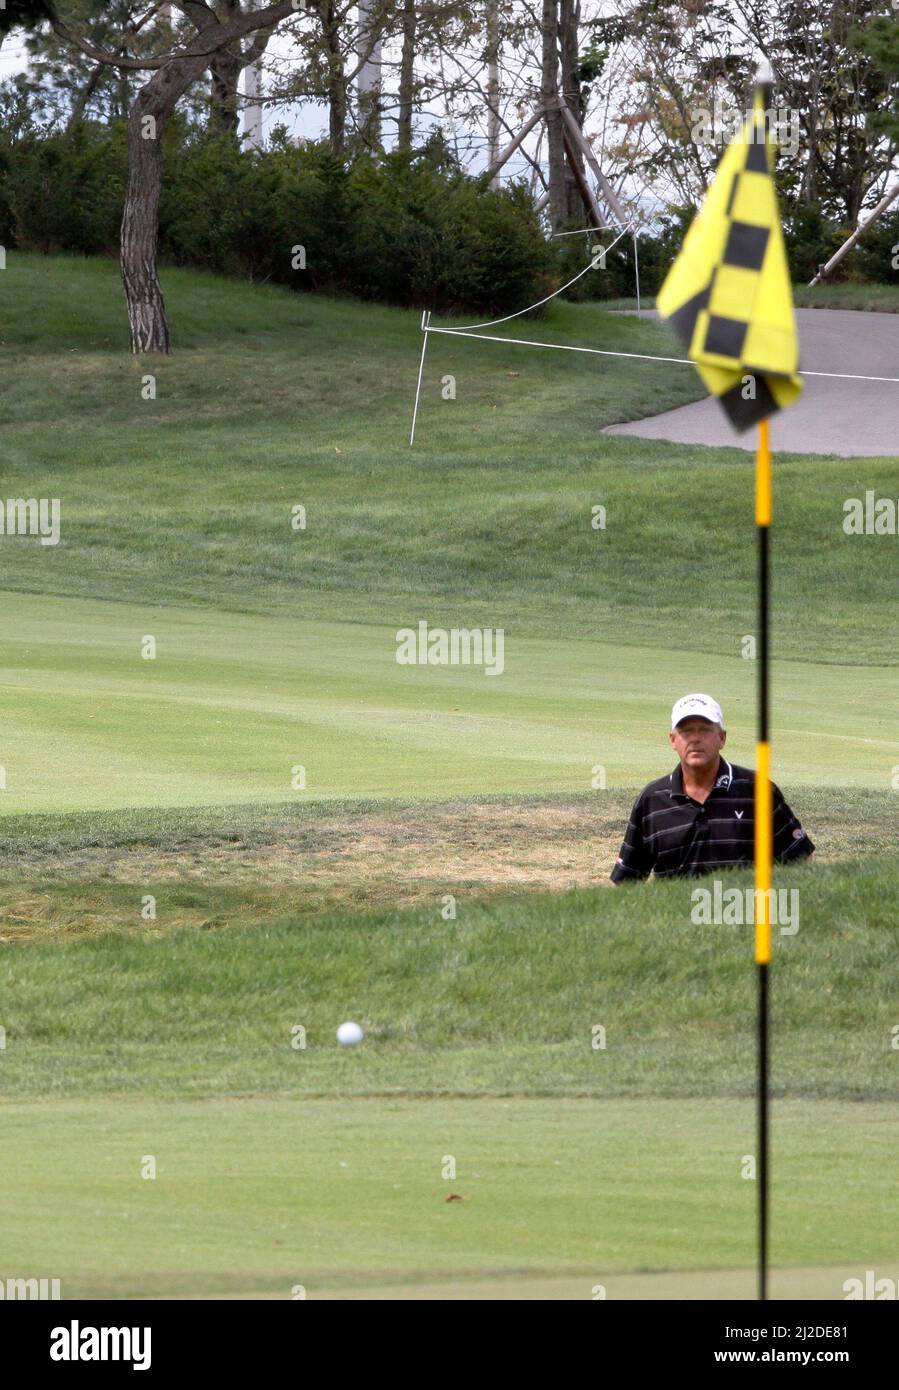 Sep 18, 2011-Incheon, South Korea-Mark Brooks of USA, 14th hall putt during the PGA Tour Songdo IBD championship final round at Jack Nicklaus golf club in Incheon on Sep 18, 2011. Stock Photo